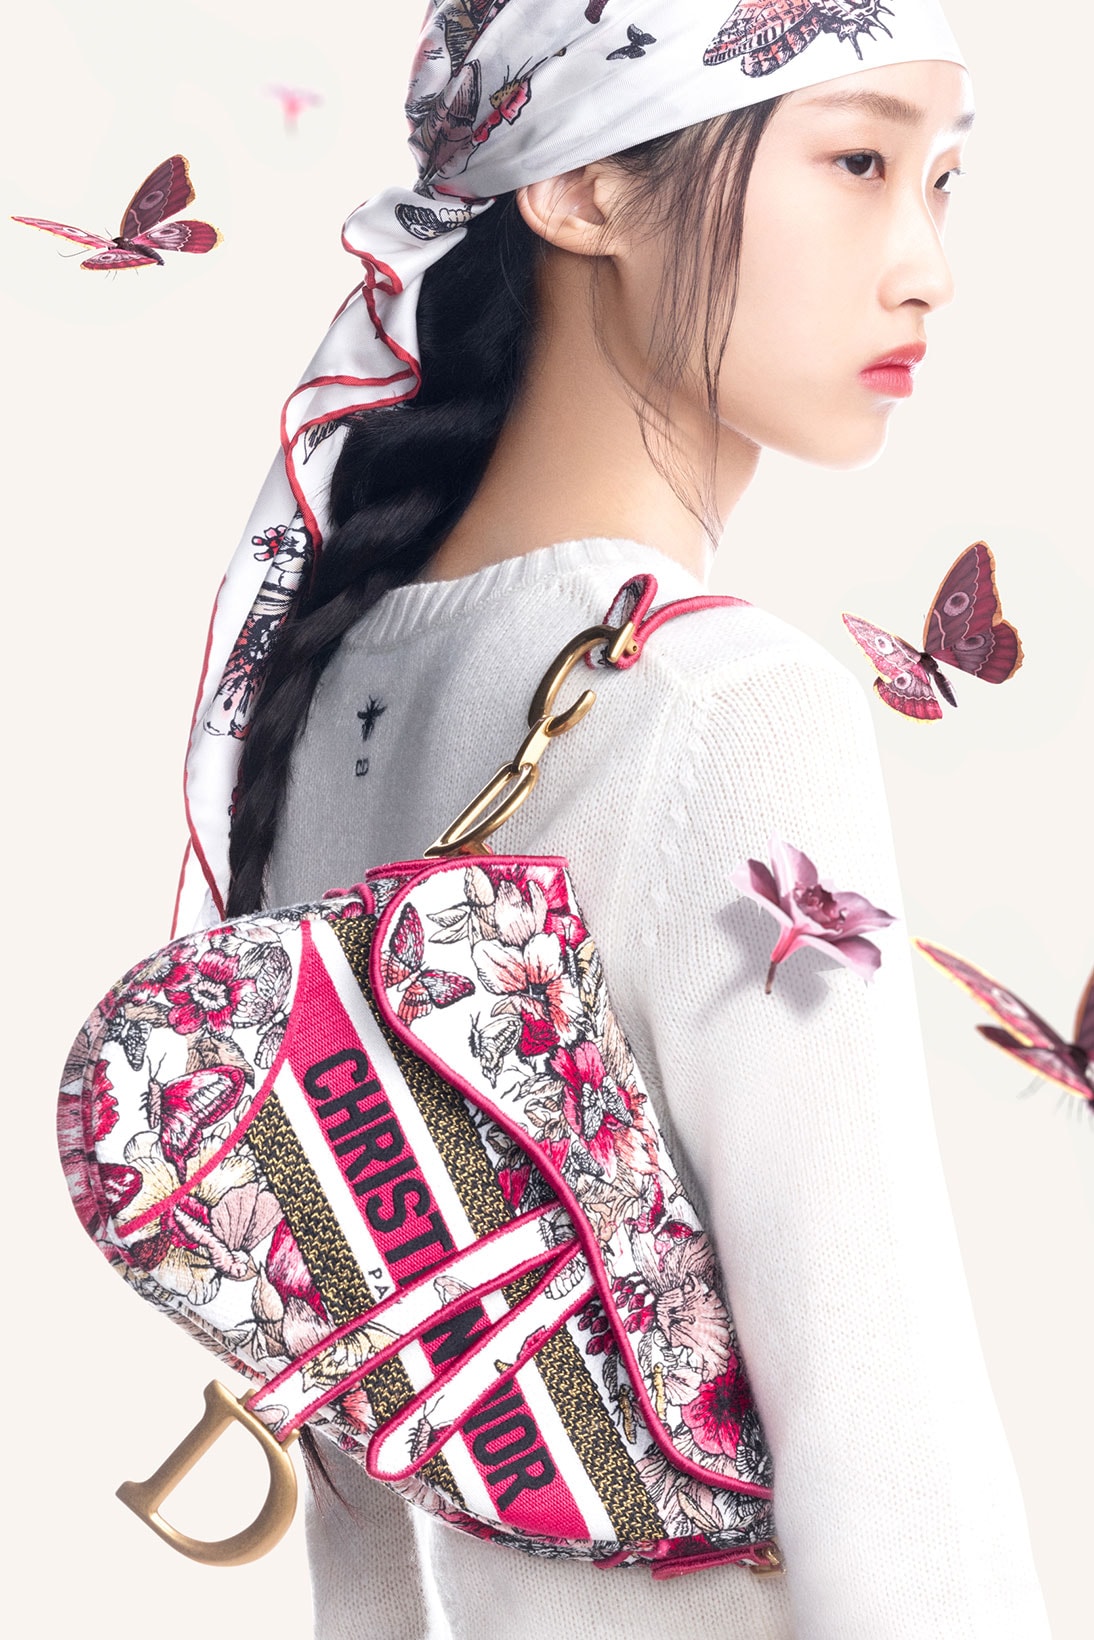 Dior Lunar New Year Capsule Collection Saddle Bag